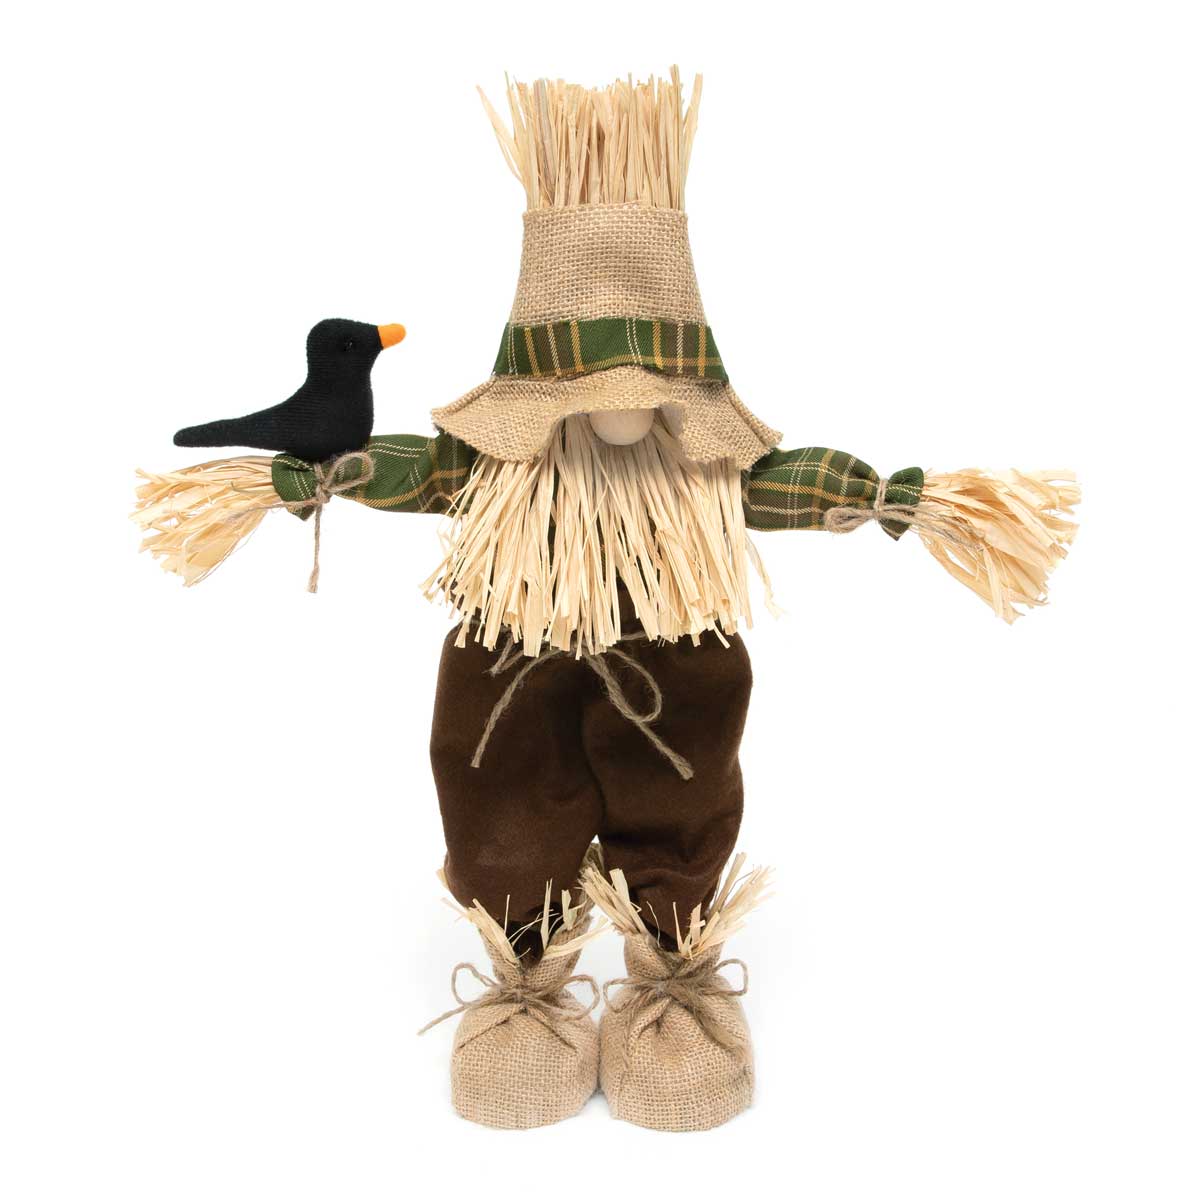 GNOME SCARECROW STANDING CROW 15.5IN X 3.5IN X 17.5IN